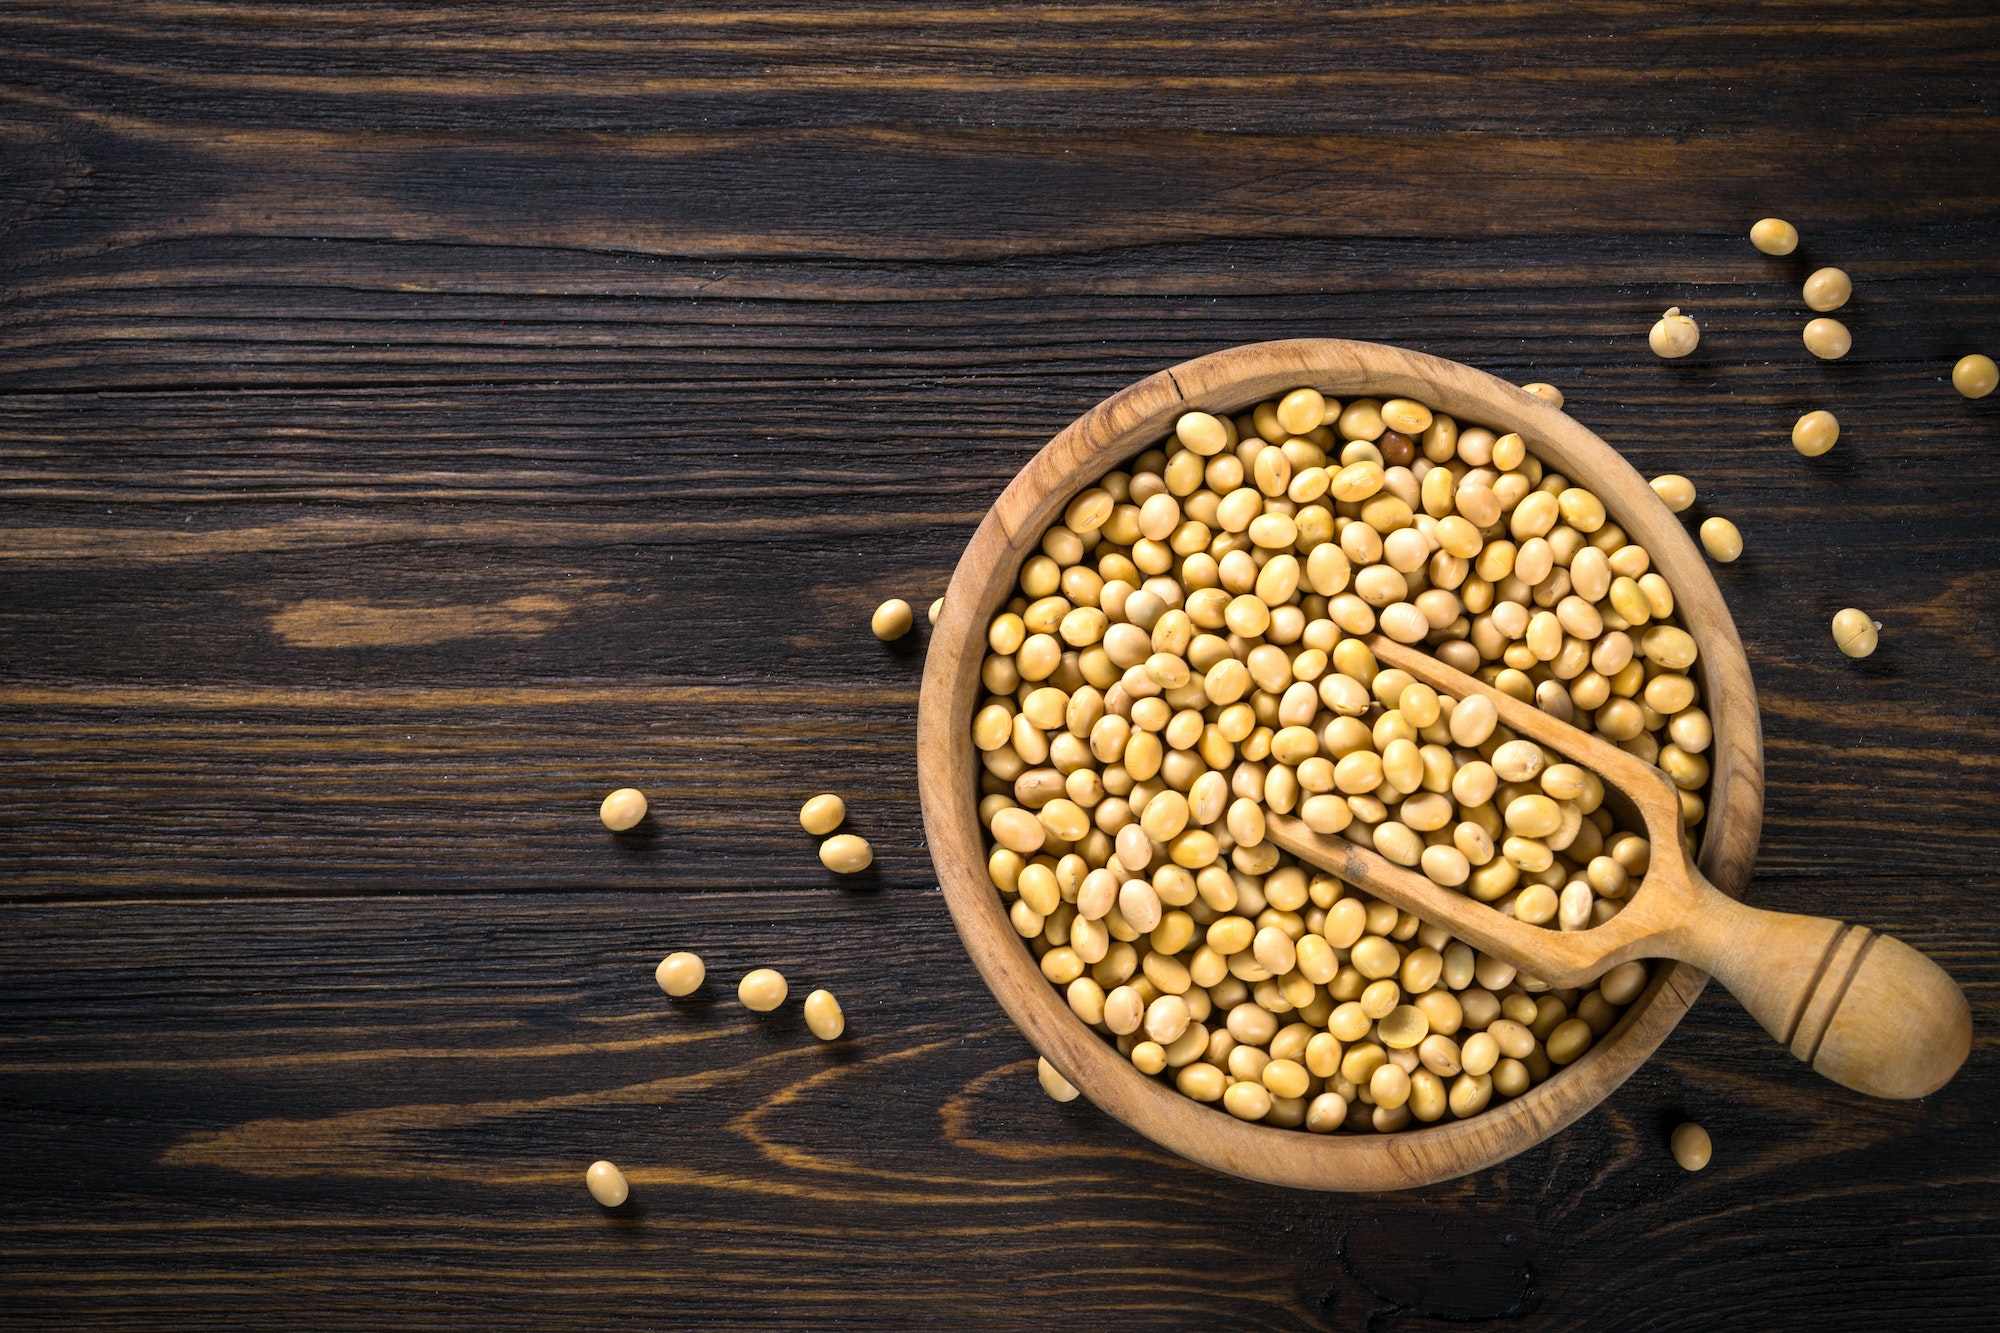 Soy is a source of plant based protein.